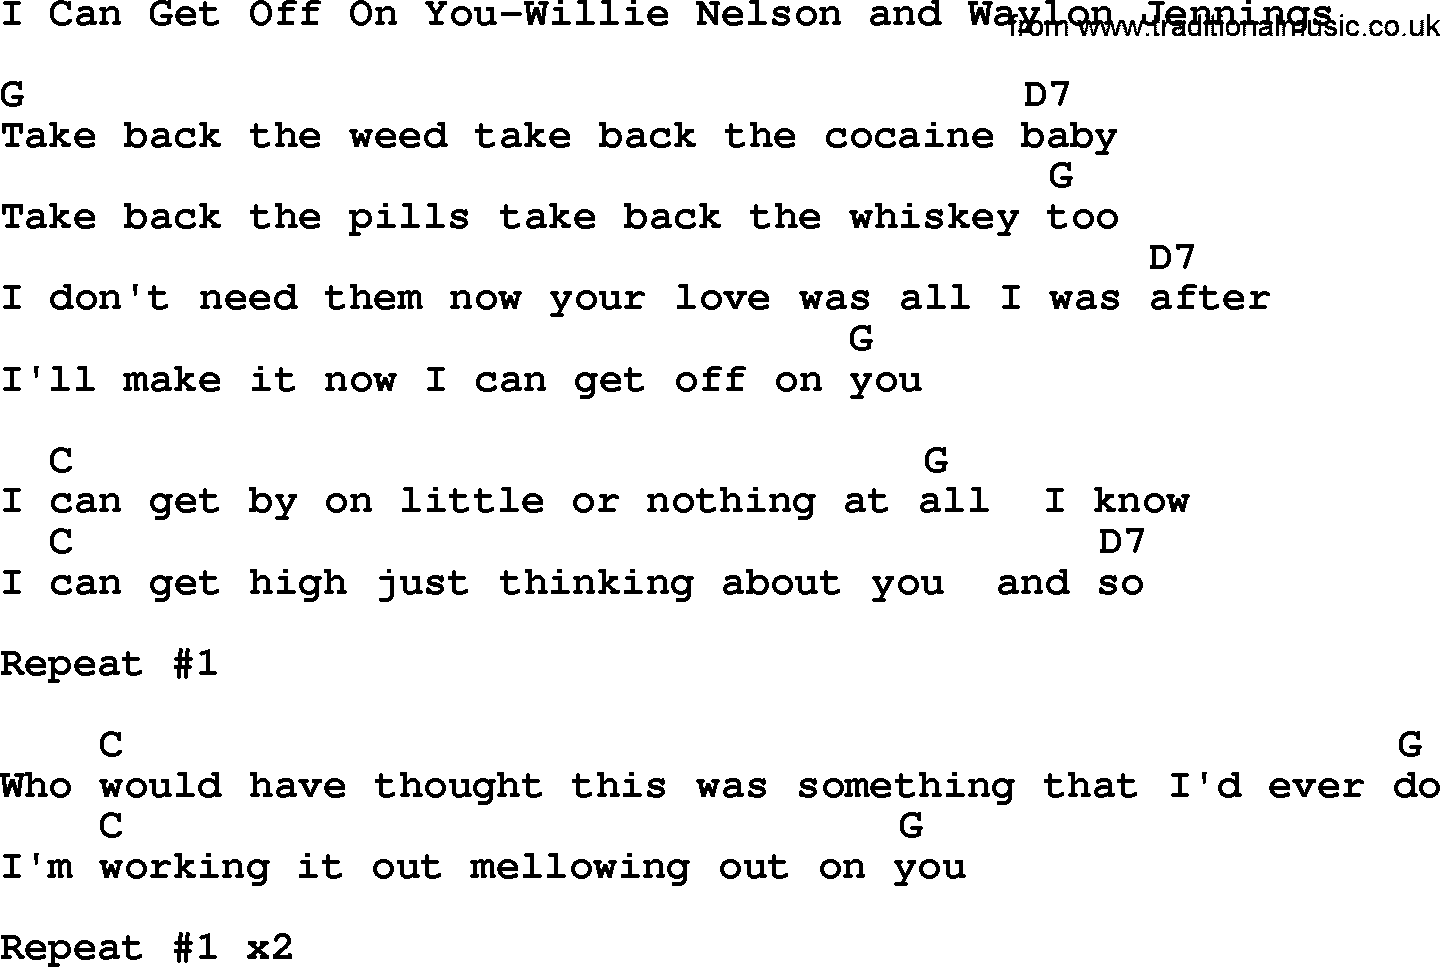 Country music song: I Can Get Off On You-Willie Nelson And Waylon Jennings lyrics and chords